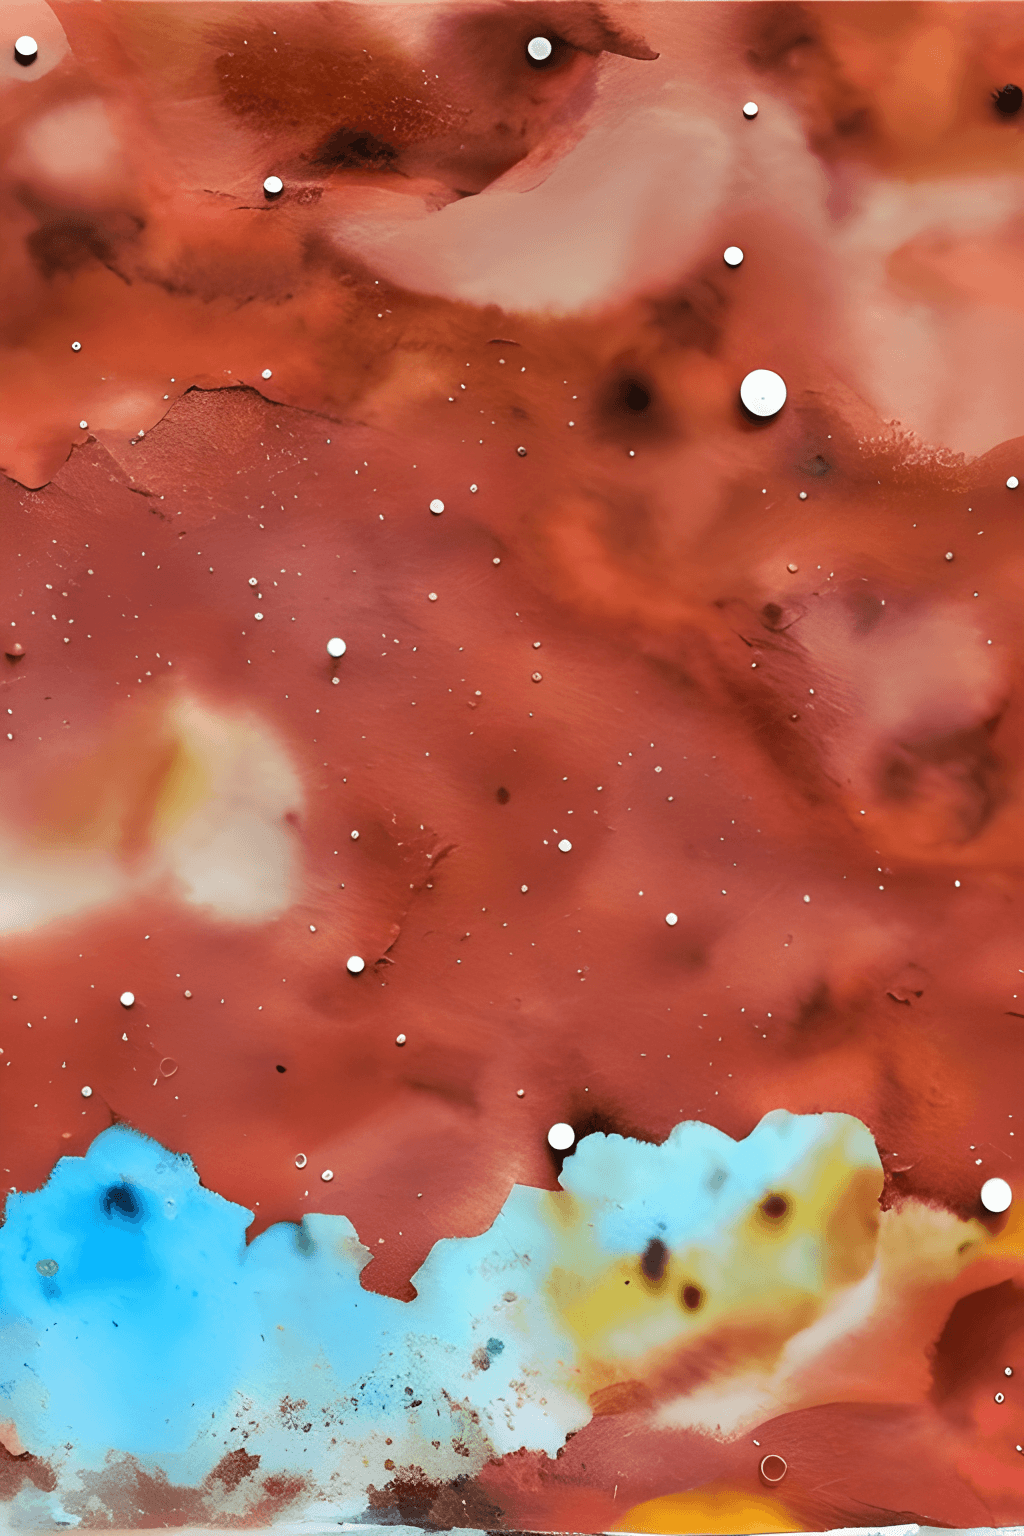 A painting of a deep red and blue sky with white speckles - Mars